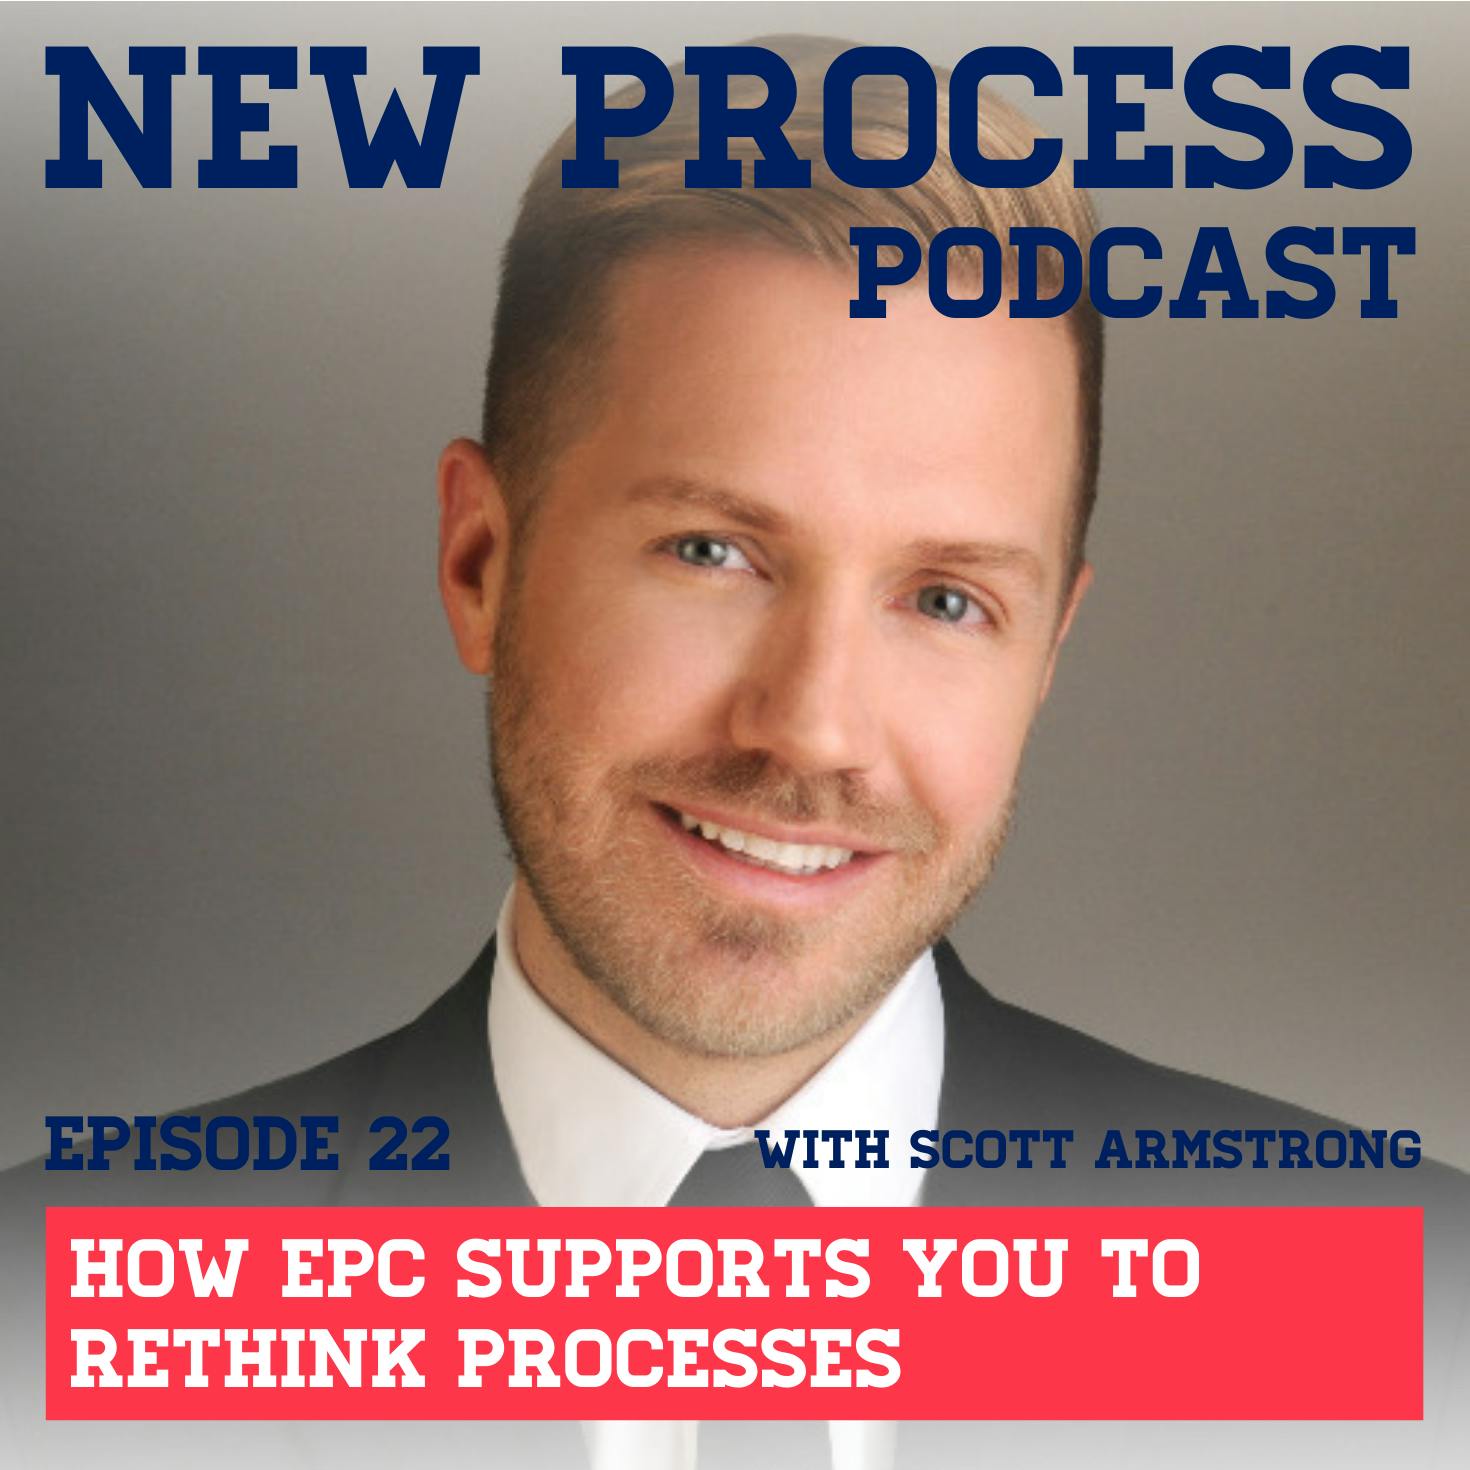 New Process Podcast: How EPC supports you to rethink processess